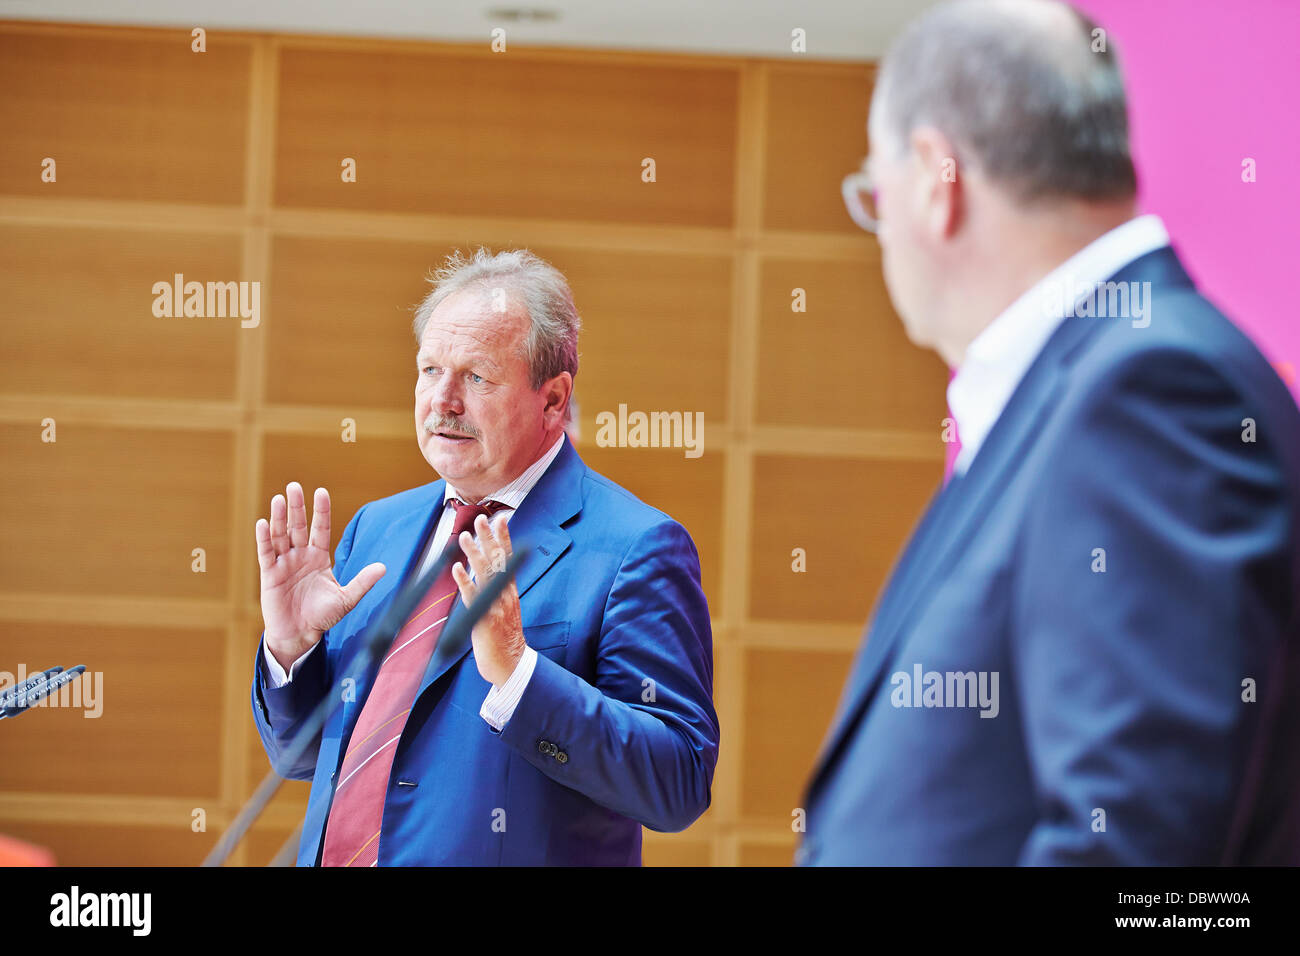 Berlin, Germany. 5th August, 2013. Press statement by Peer Steinbrück and the Verdi-chairman Frank Bsirske about care system at the headquarters of the SPD Party (Willy-Brandt-Haus) in Berlin. Credit:  Reynaldo Chaib Paganelli/Alamy Live News Stock Photo